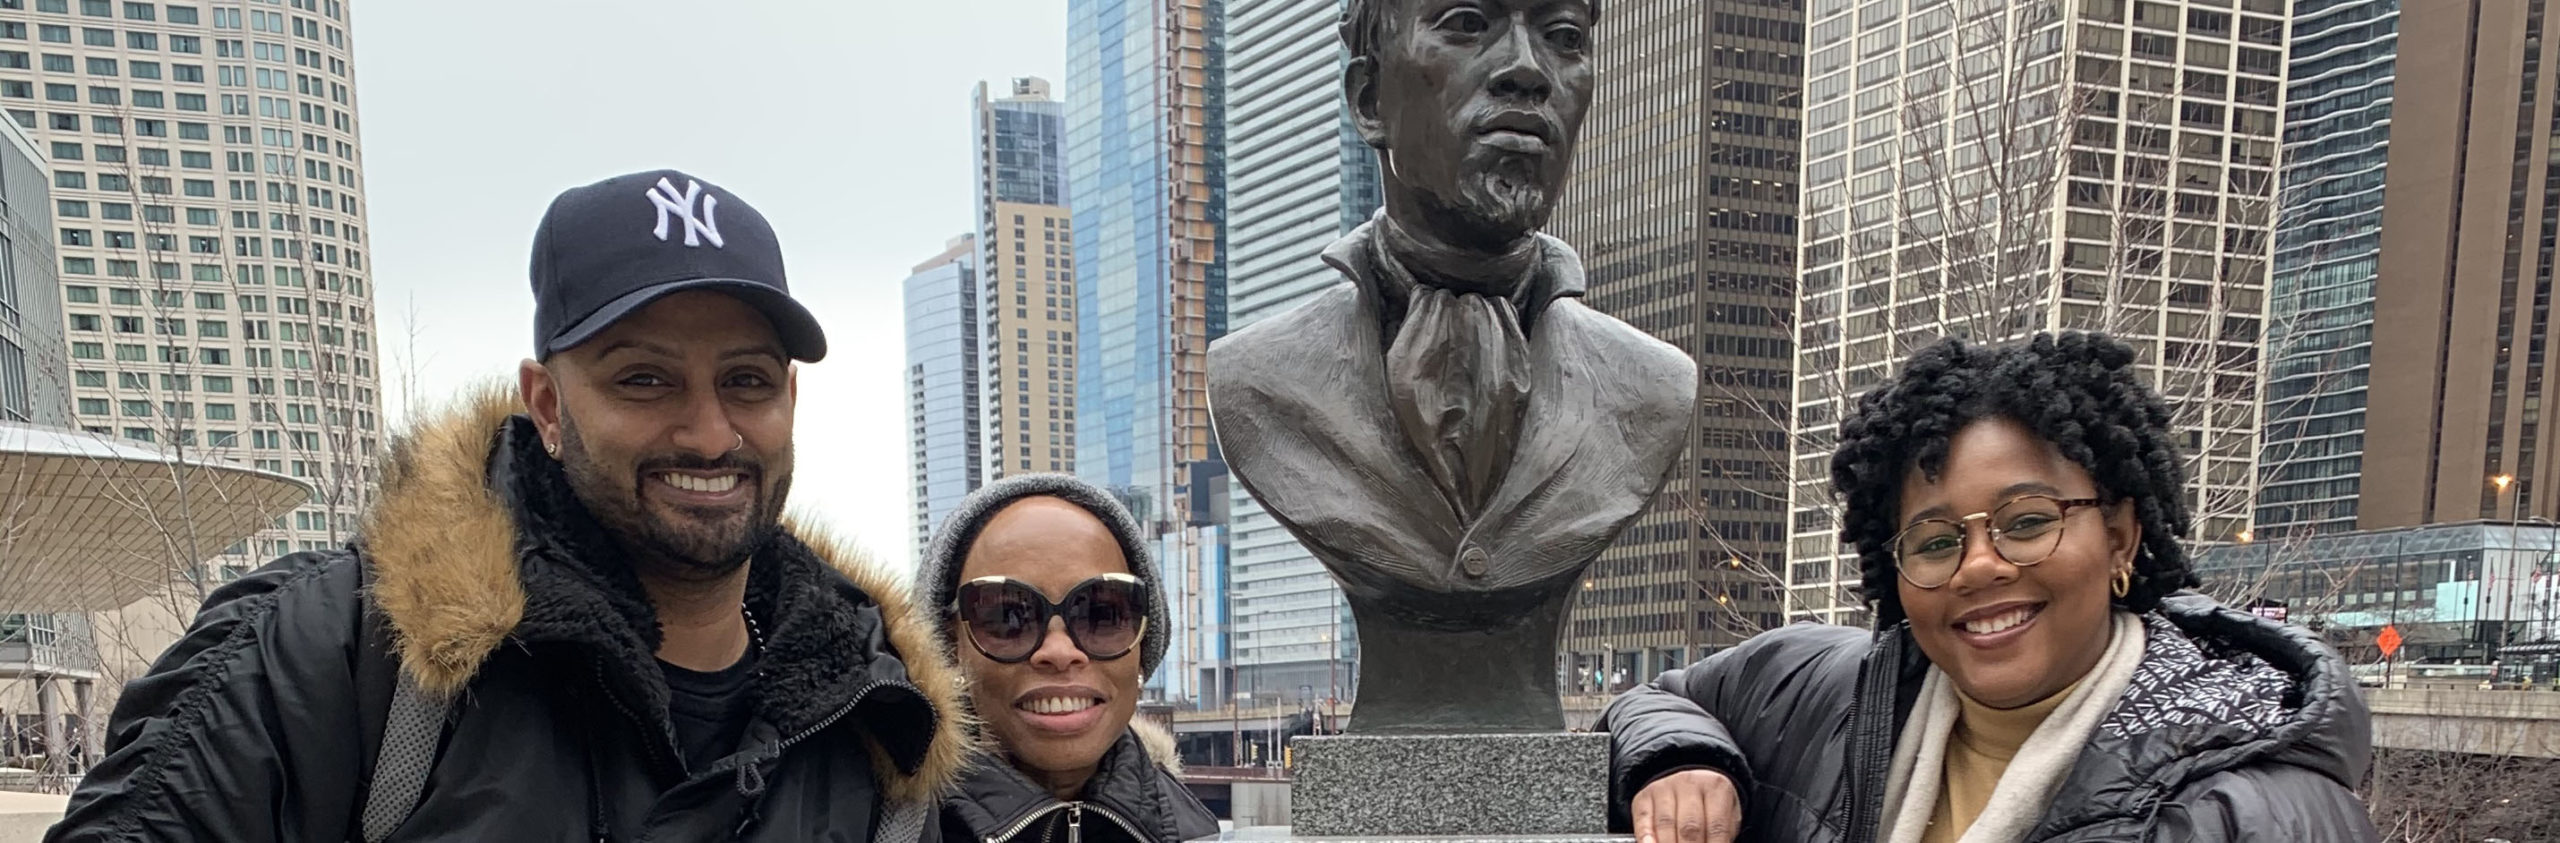 Arshad Desai, Andrea Davis and Aysha Campell with the bust of Jean-Baptiste Pointe DuSable, Founder of Chicago